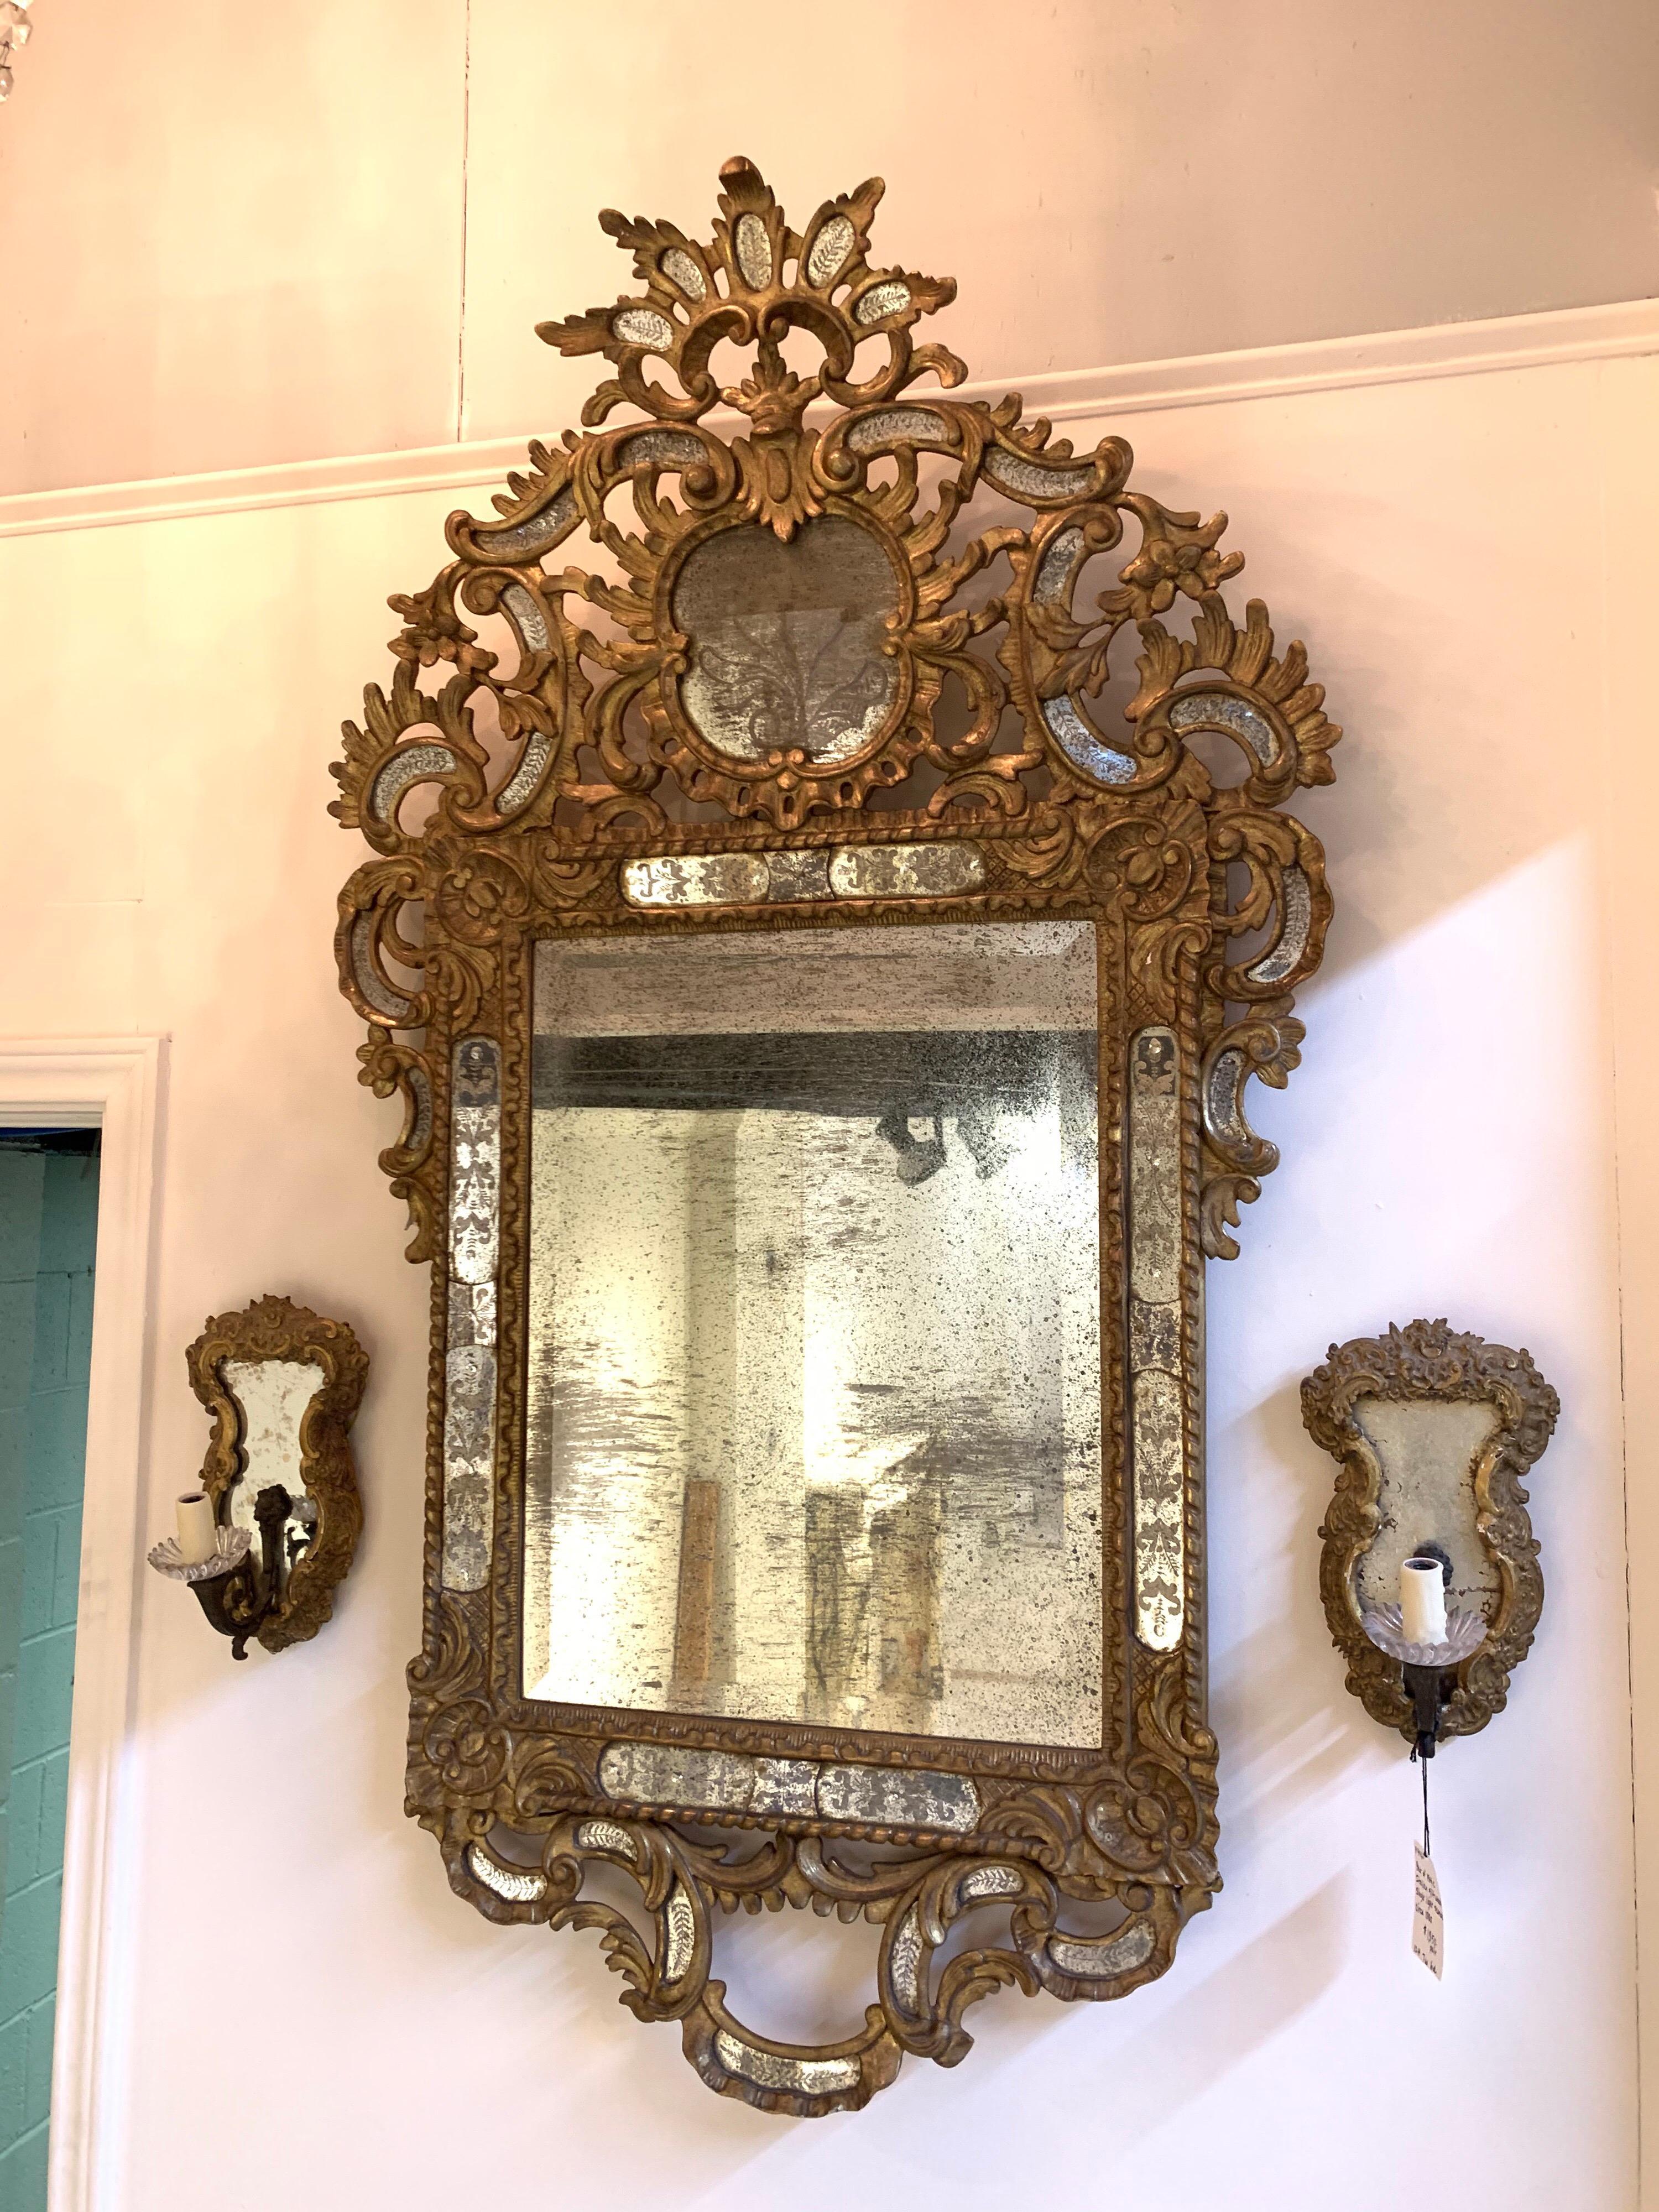 Fine quality Italian Venetian style carved and giltwood mirror with etched glass. Lovely intricate carvings with inlaid etched glass. Creates a beautiful effect. So elegant!